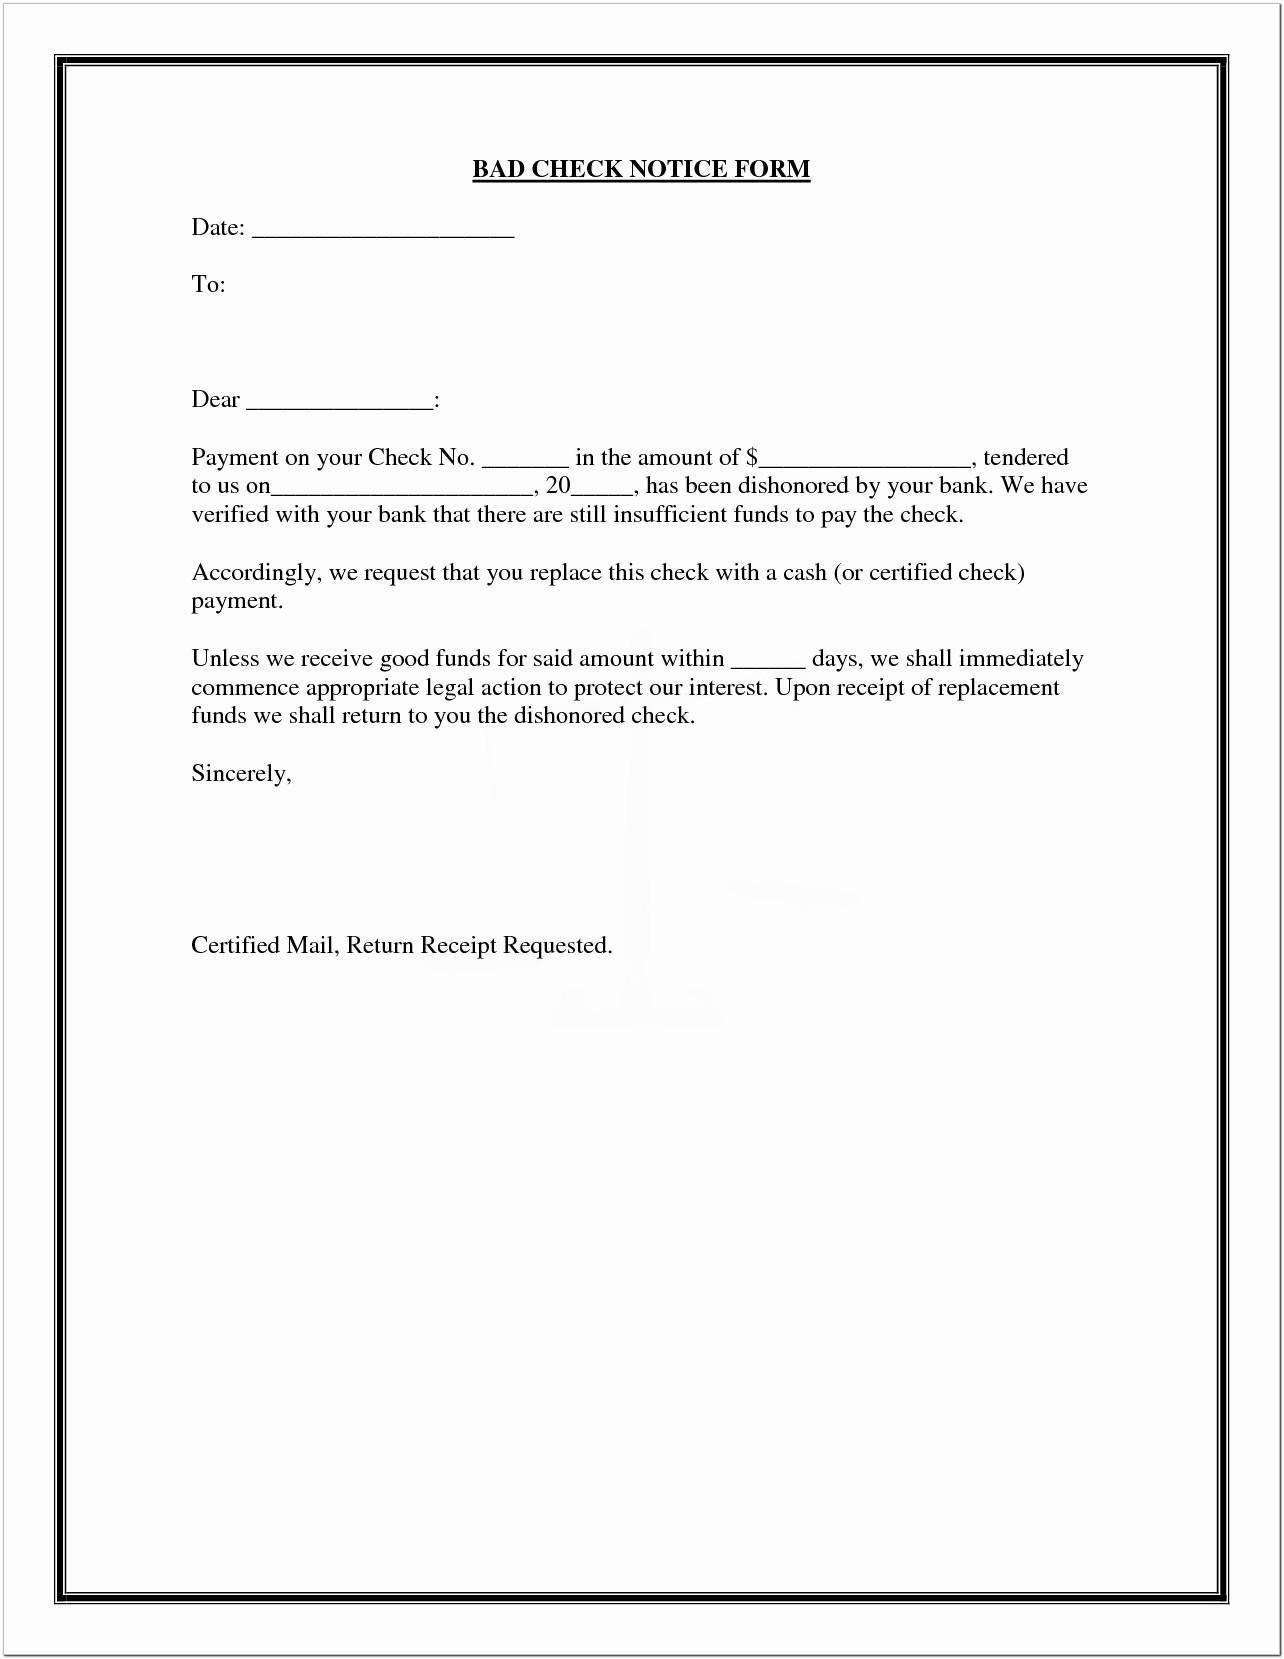 Bad Check Letter Template Florida